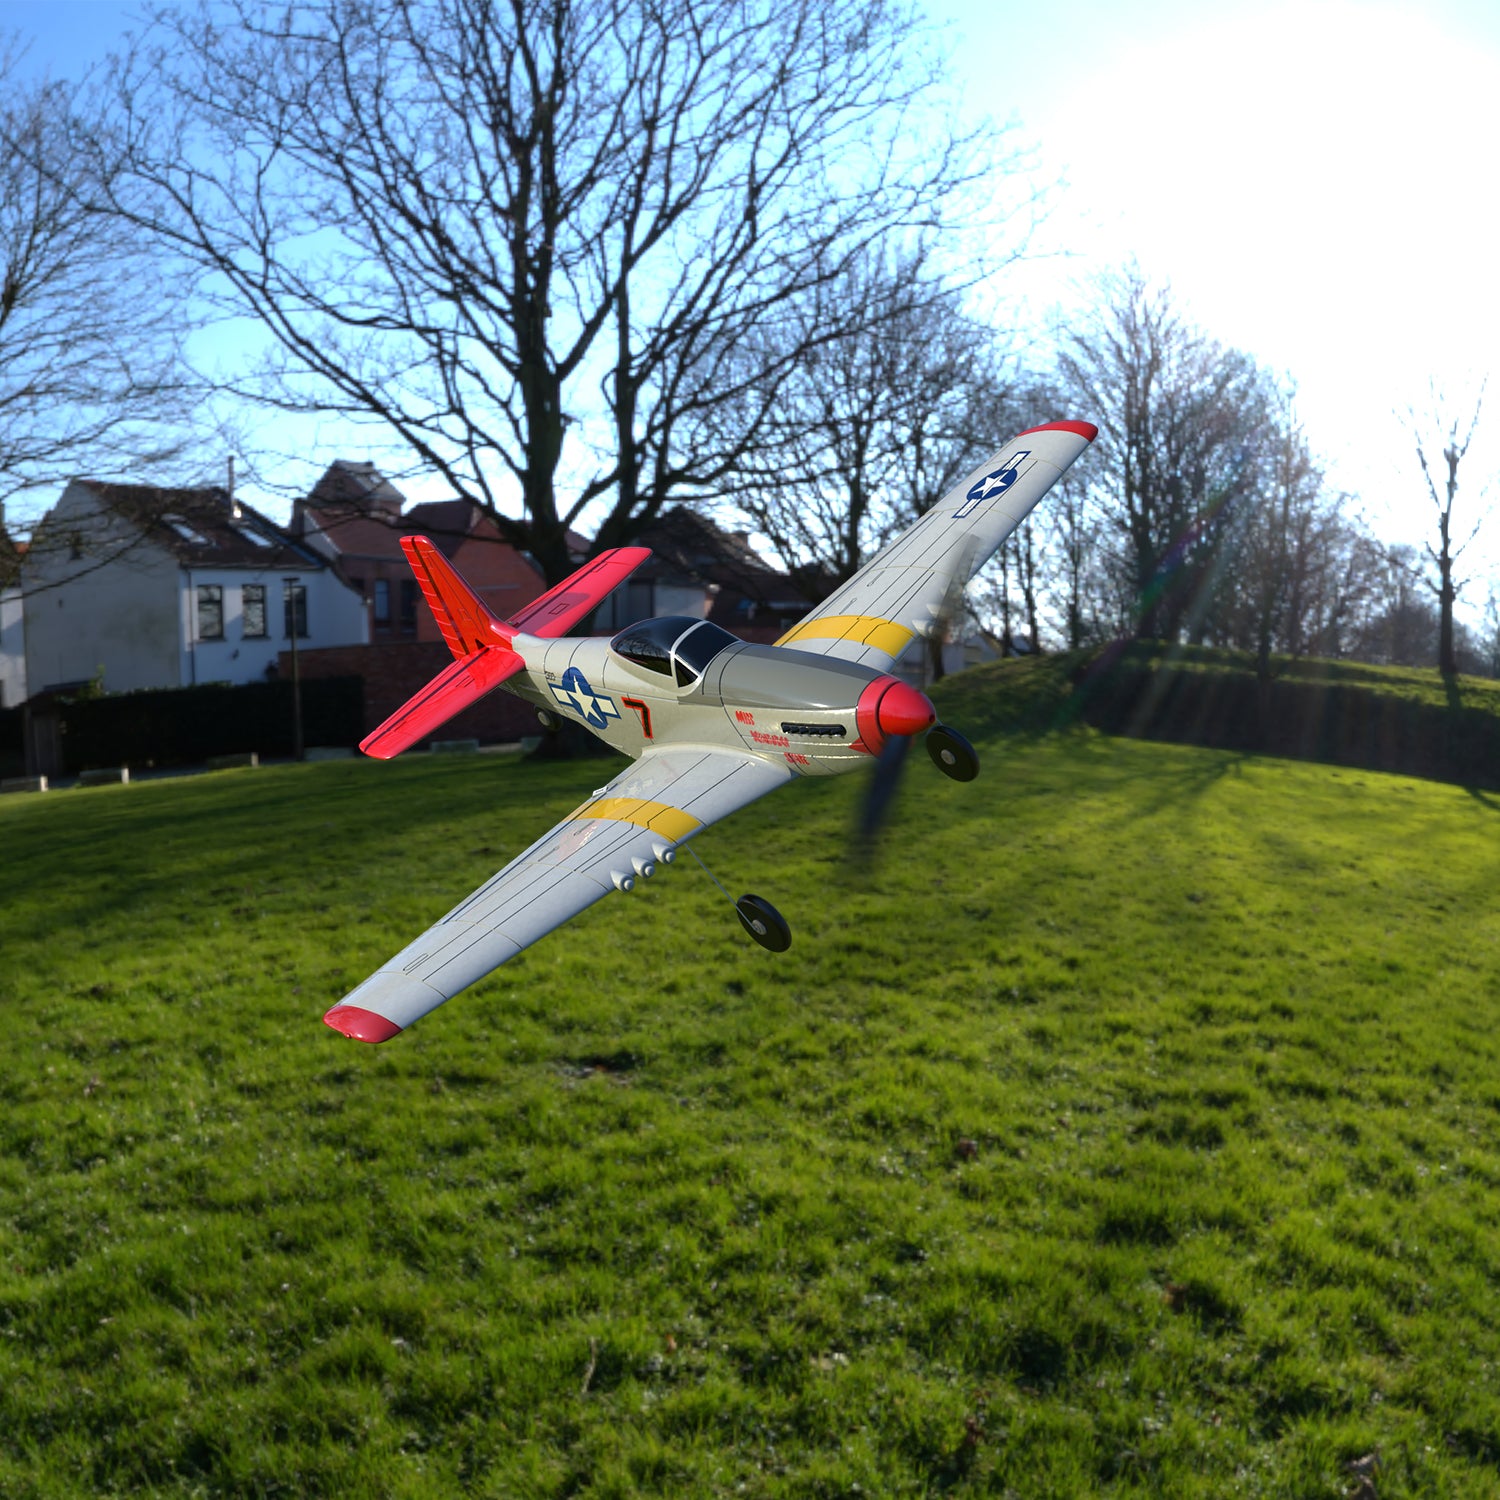 Important Design Characteristics for Selecting Your First RC Plane